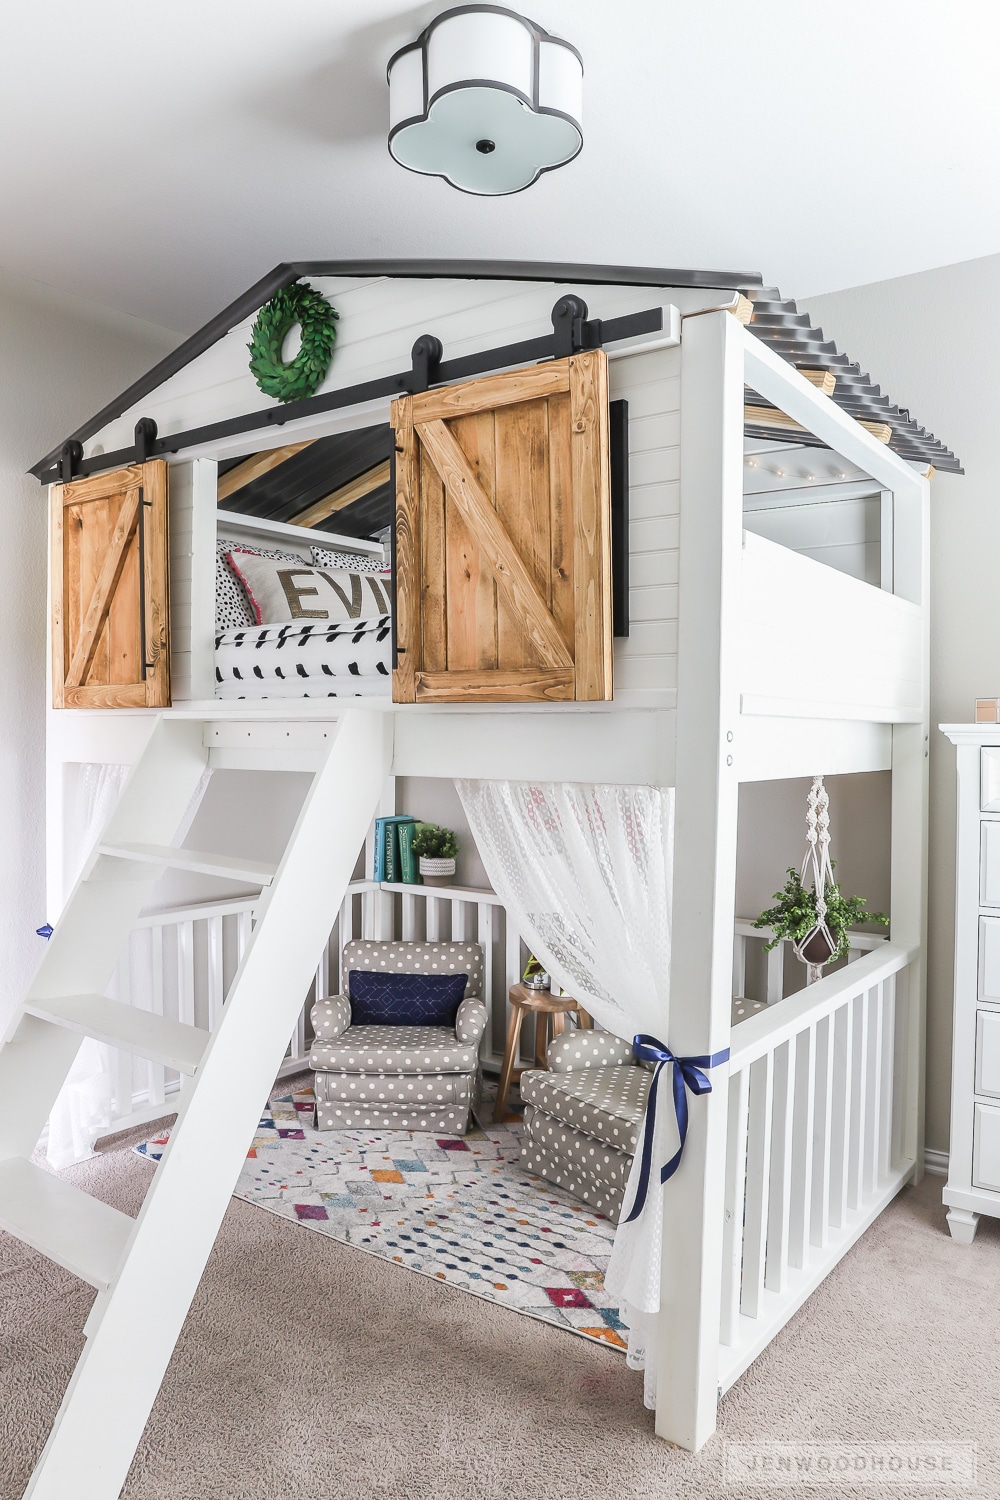 Farmhouse Style Loft Bed for Kids